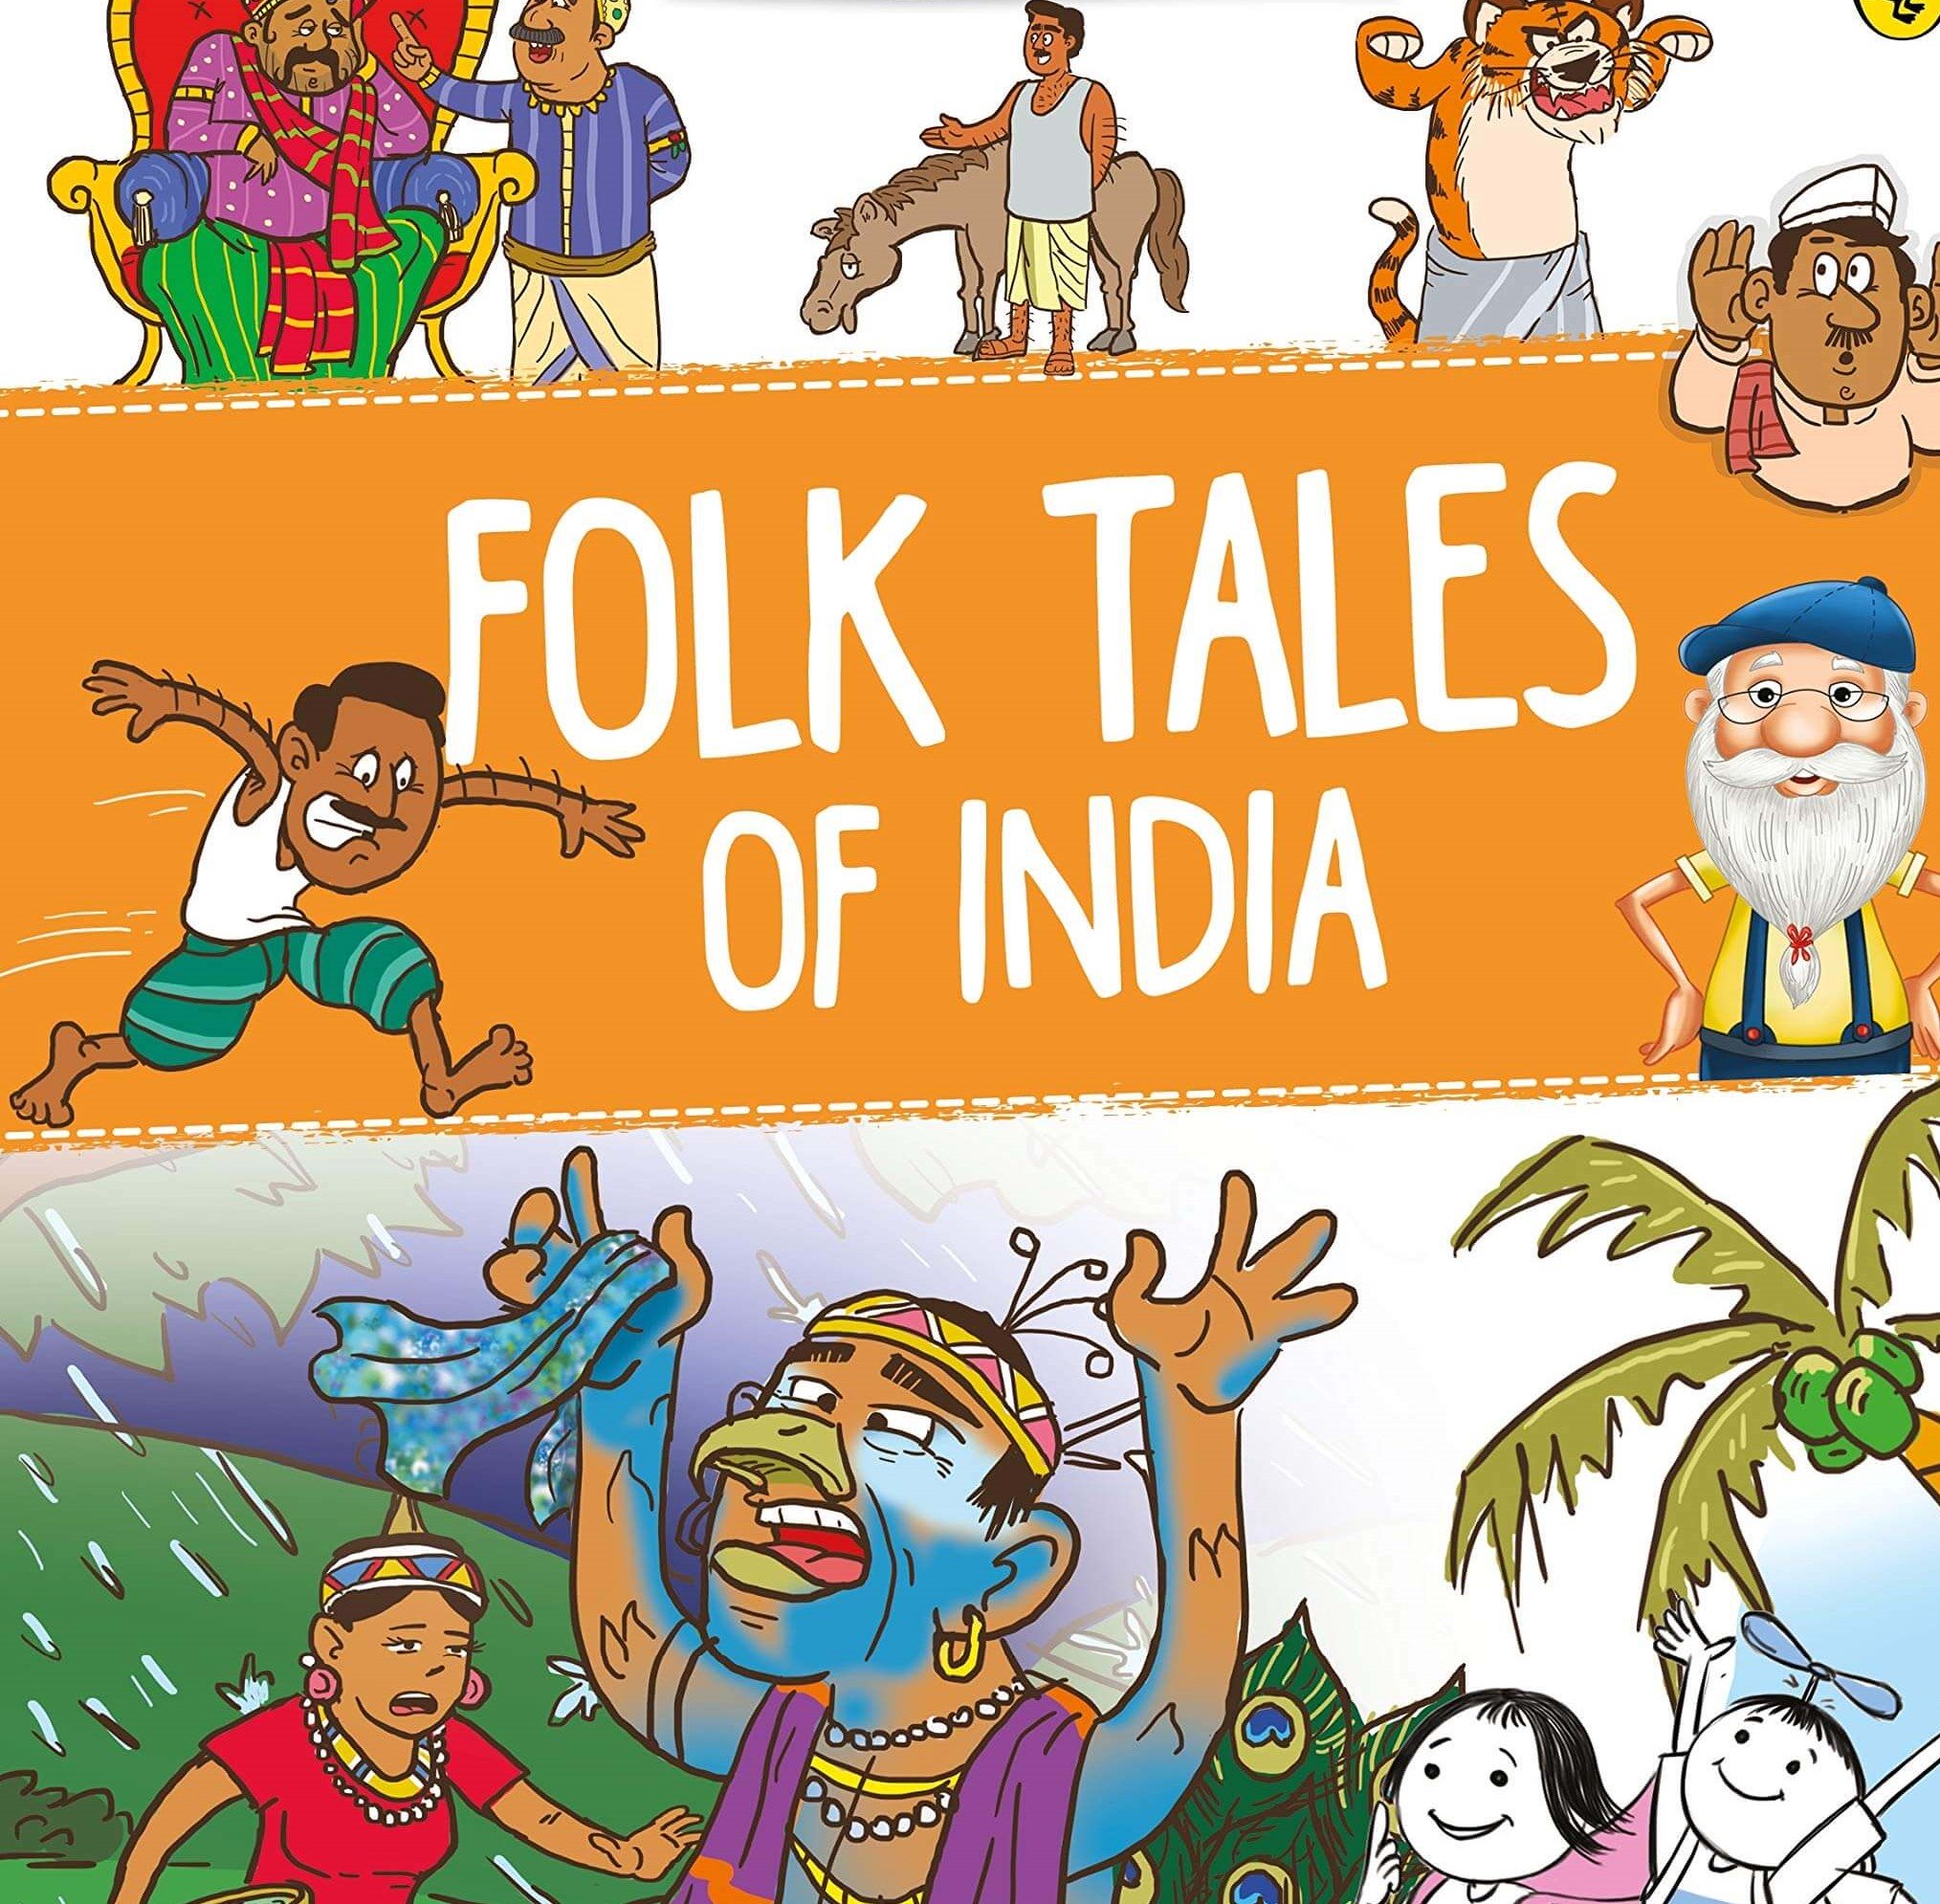  Indian folktales consist of a wide range of moral stories from Jataka Tales, Panchatantra stories, Hithopadesha and many more.